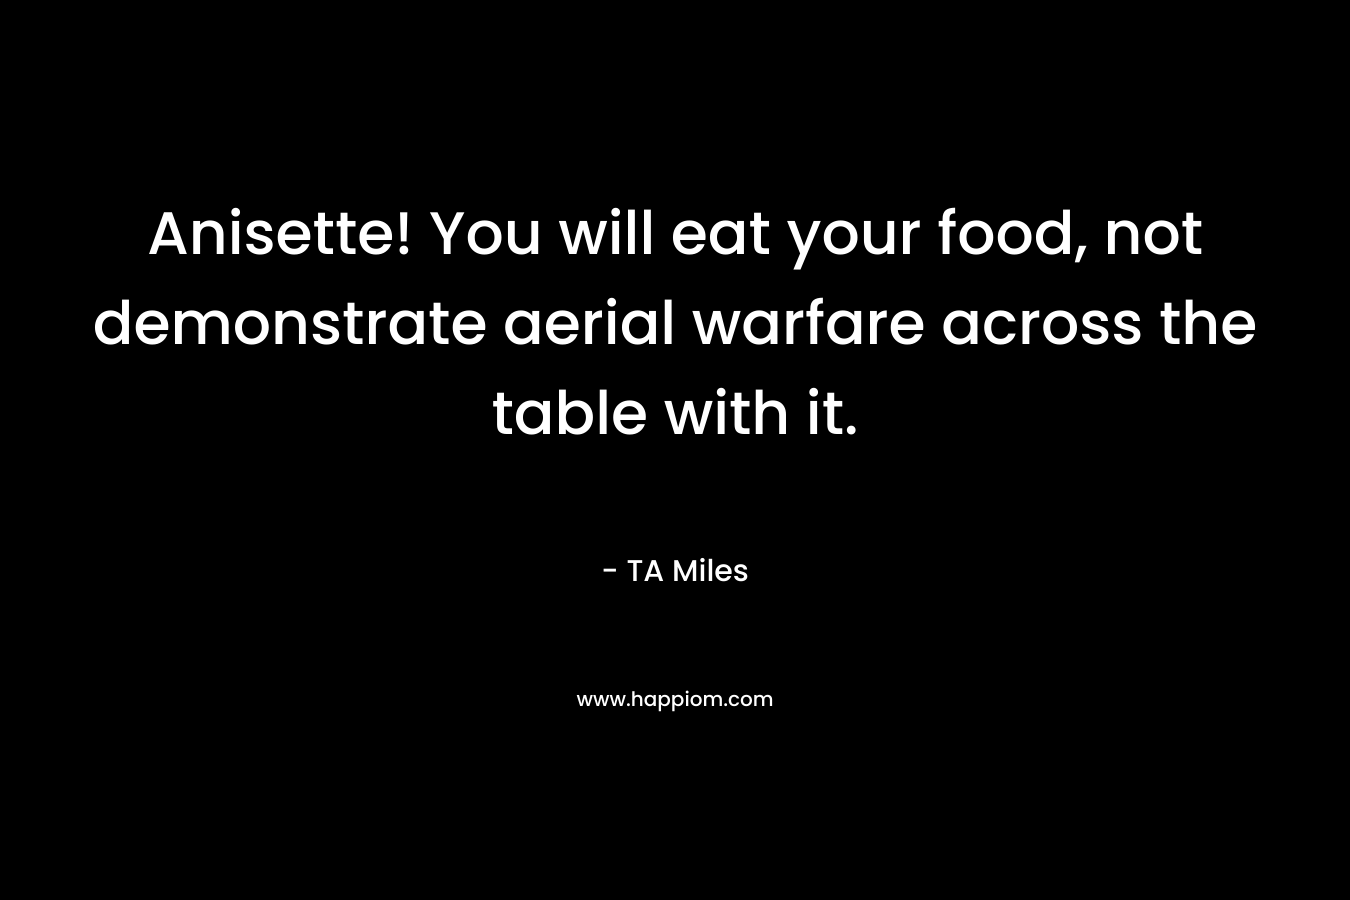 Anisette! You will eat your food, not demonstrate aerial warfare across the table with it. – TA Miles